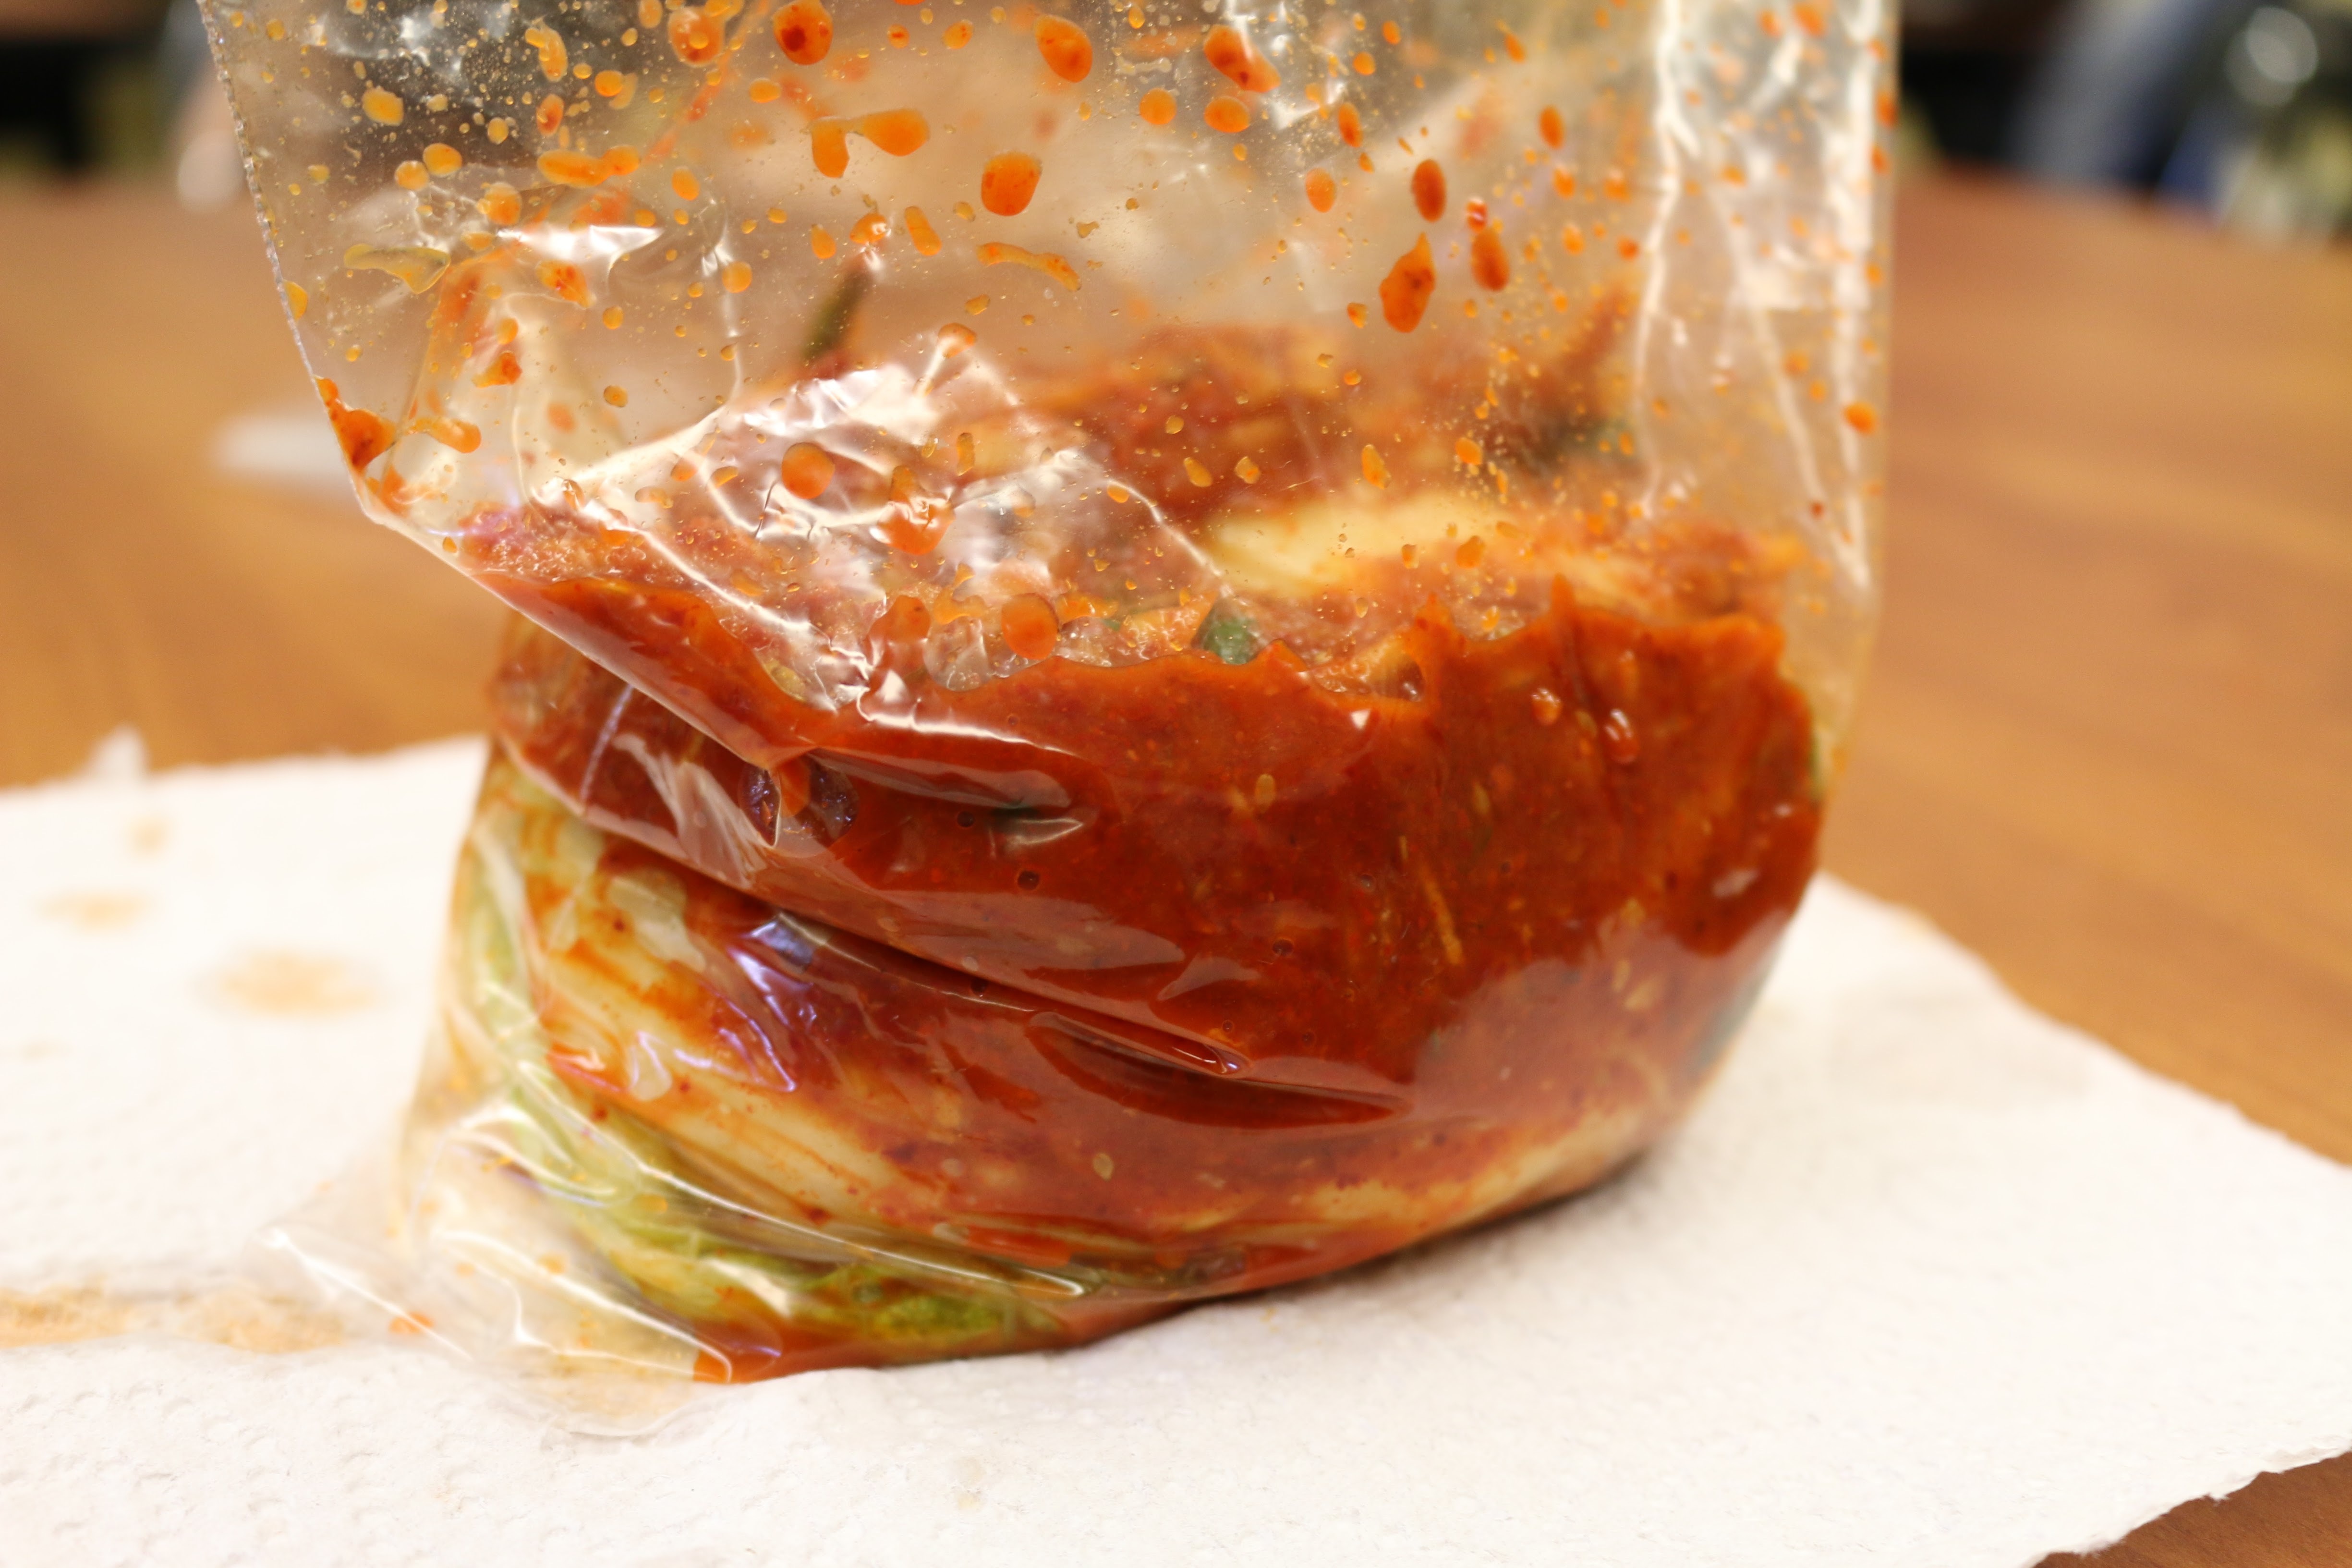 Once the napa cabbage is fully layered with seafood paste, store in a plastic container, removing all excess air, and place in the refrigerator.  Ferment to taste.